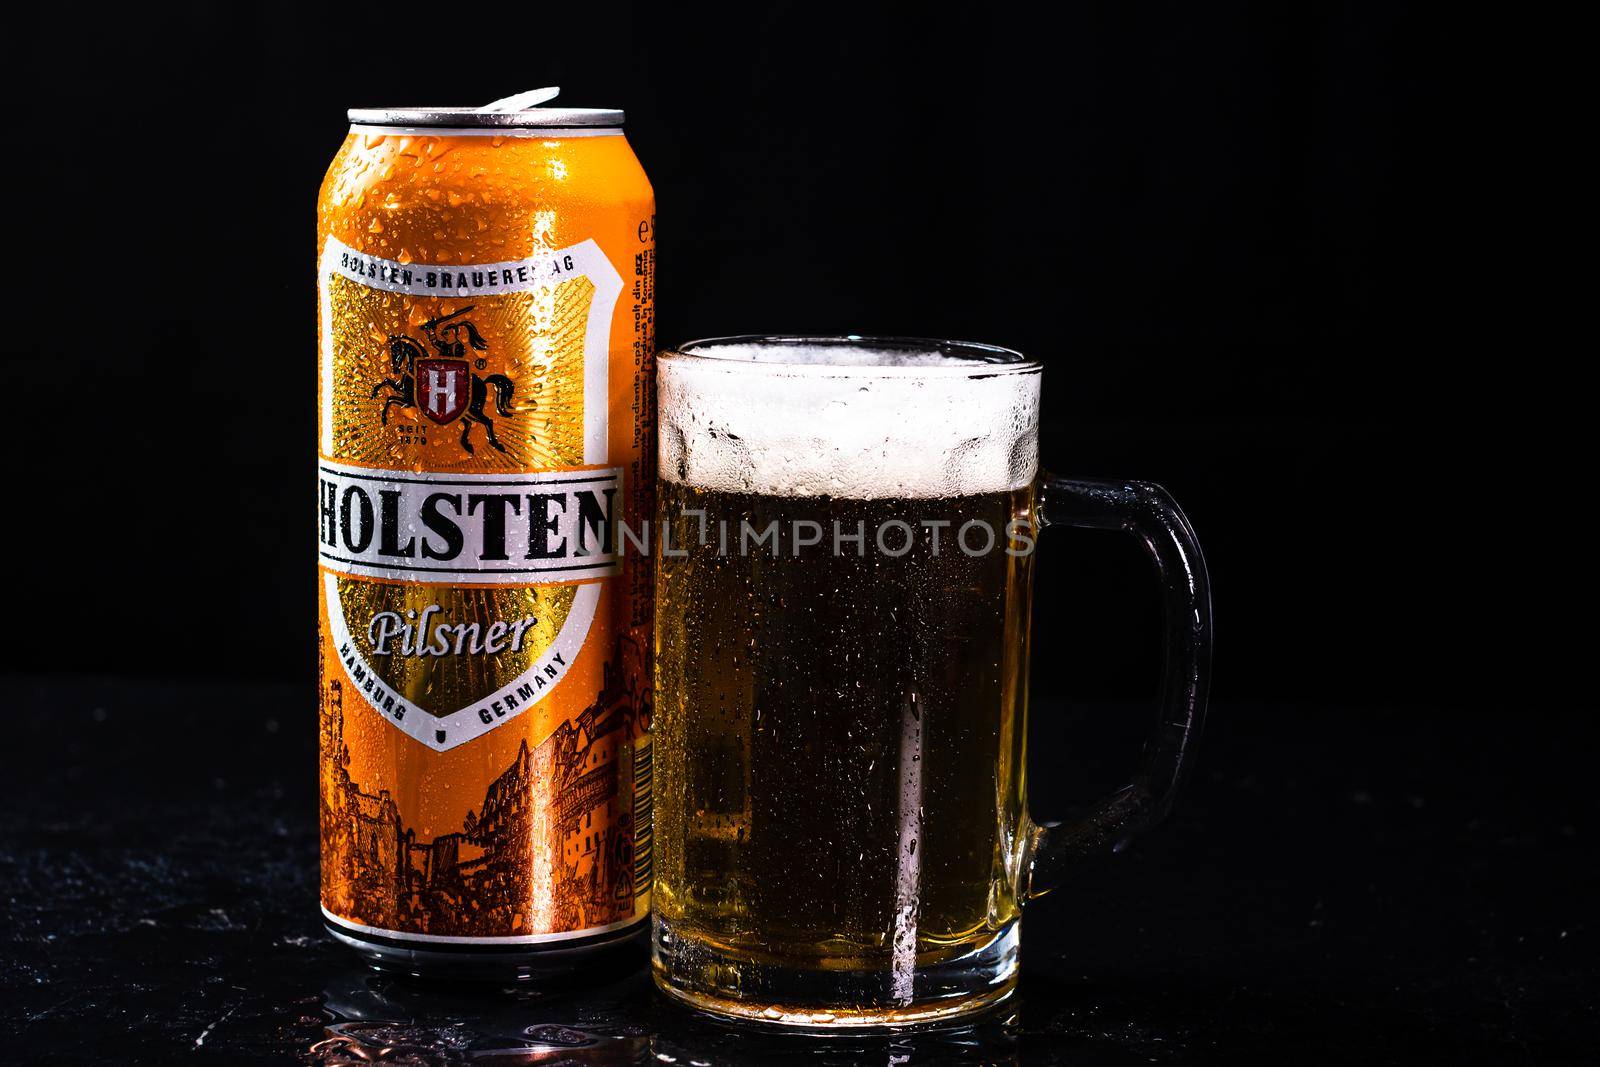 Can of Holsten beer and beer glass on dark background. Illustrative editorial photo shot in Bucharest, Romania, 2021